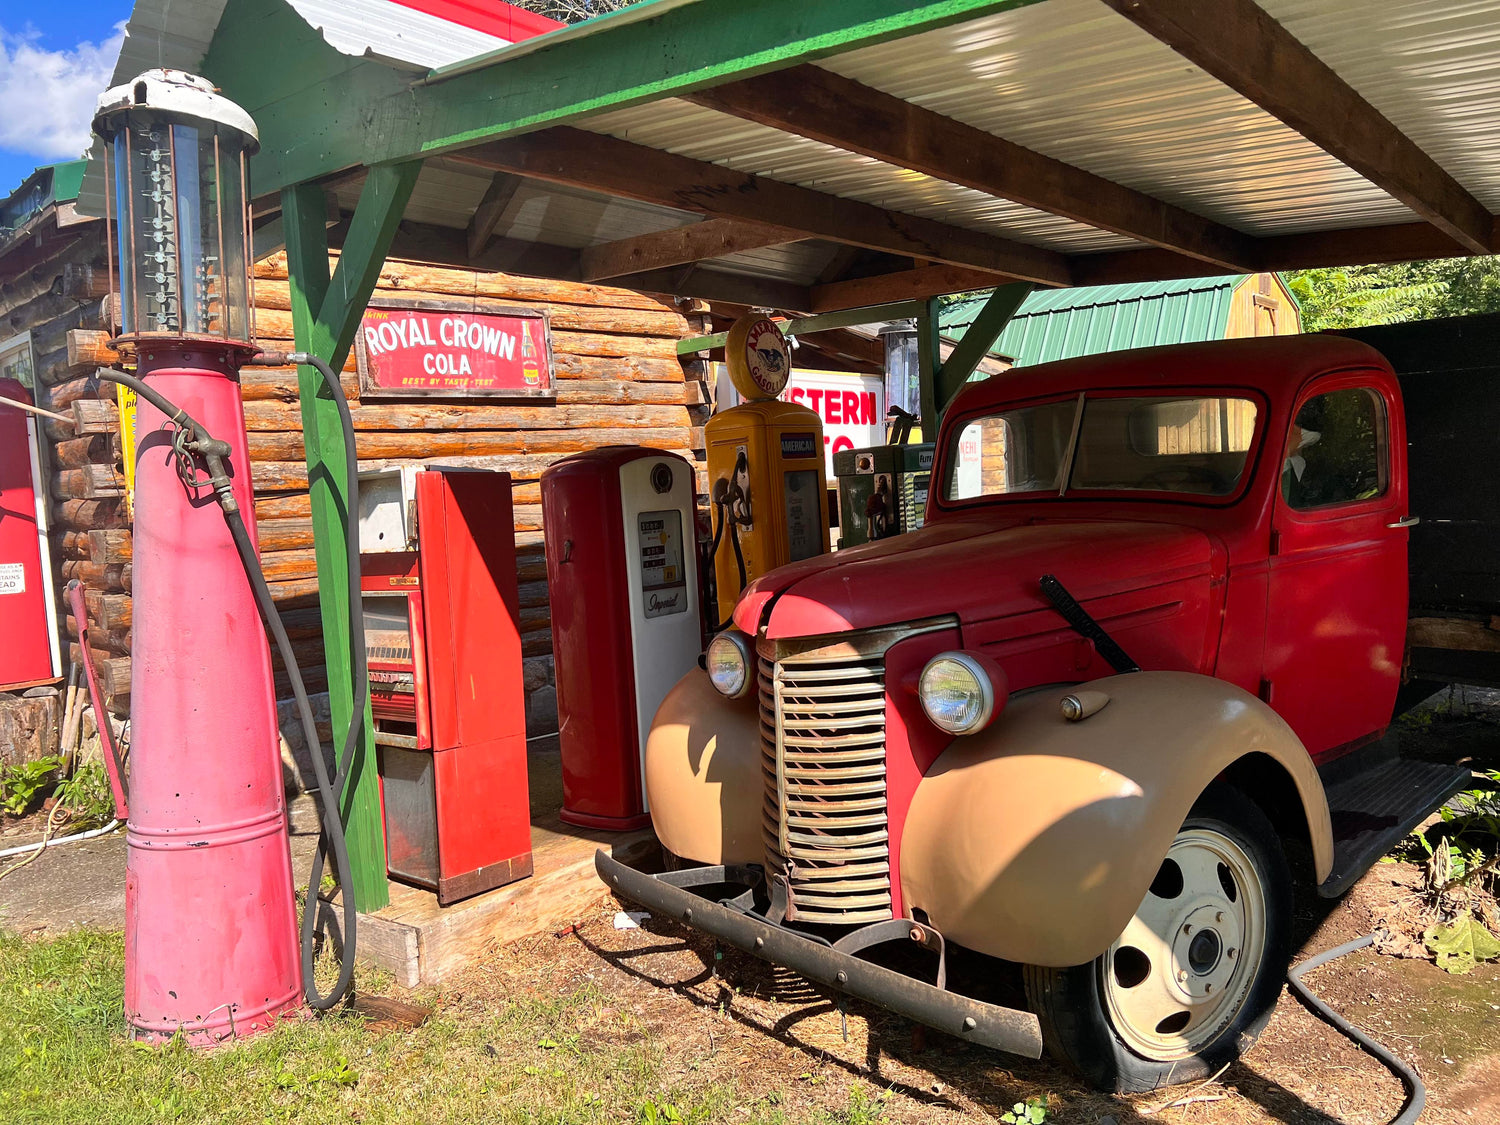 Come see our vintage truck, car and gas pumps memorabilia at Appalachian Log Cabins Lodging at Seneca Rocks, West Virginia. 